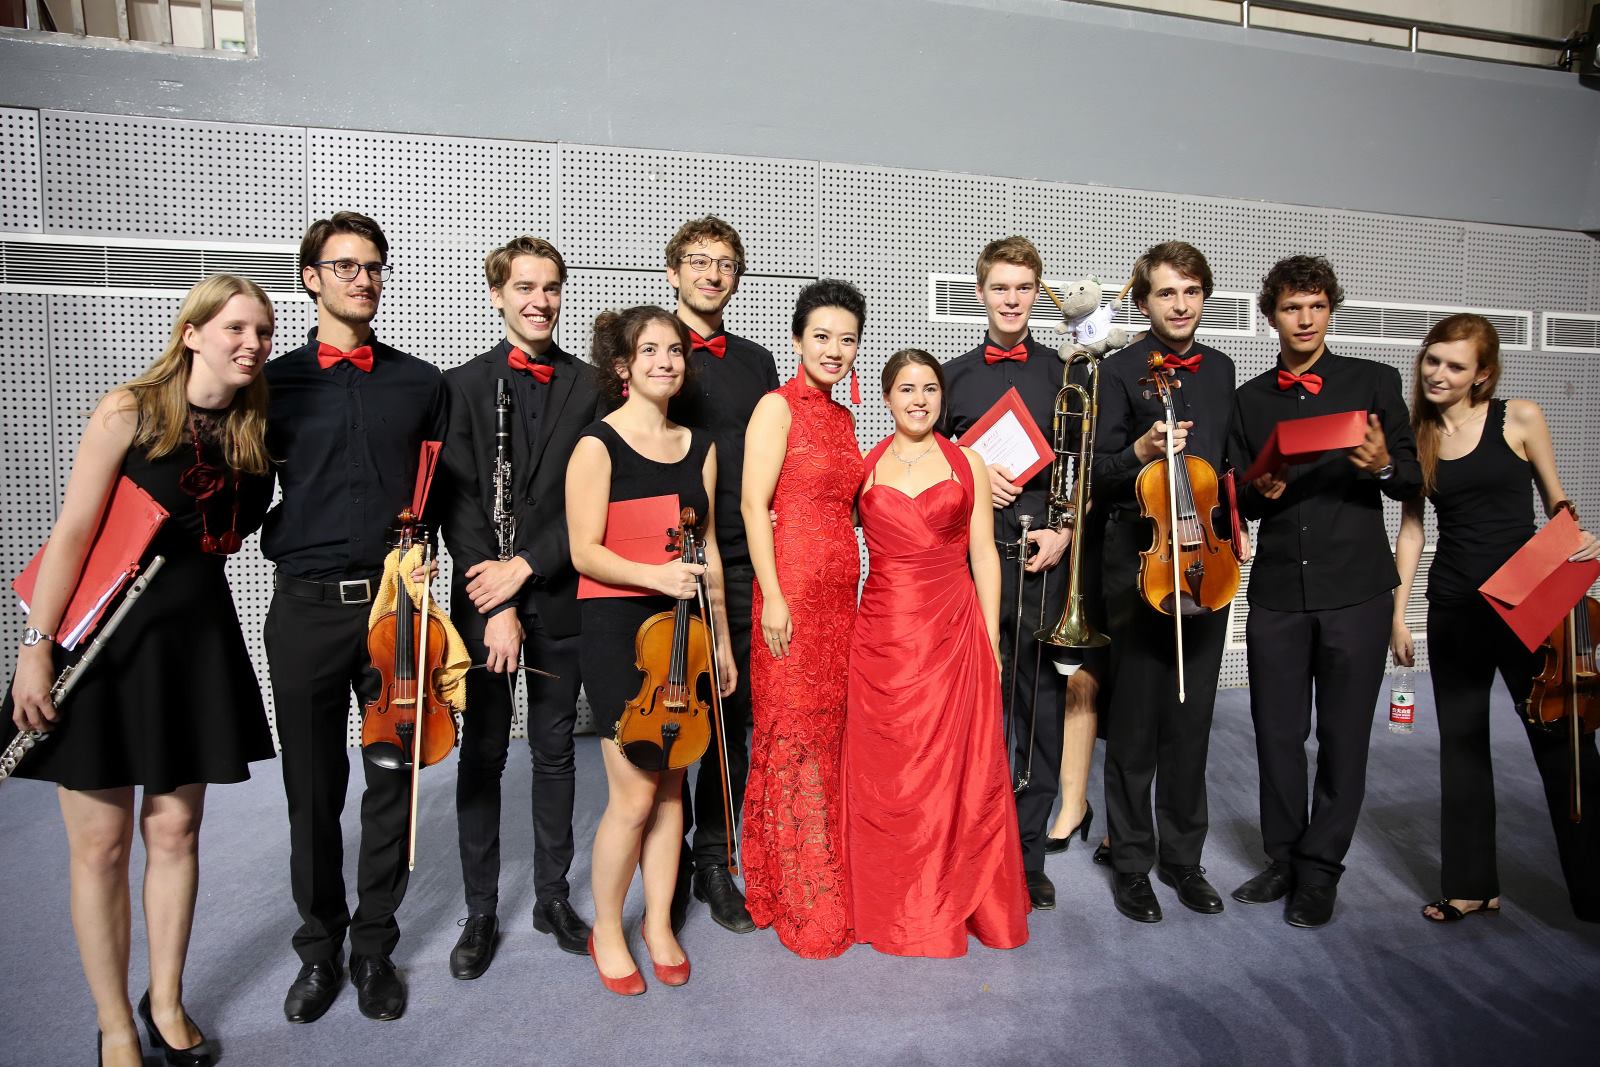 Concert China Chengdu (September 2015) with Chinese Soprano and some orchestra members.